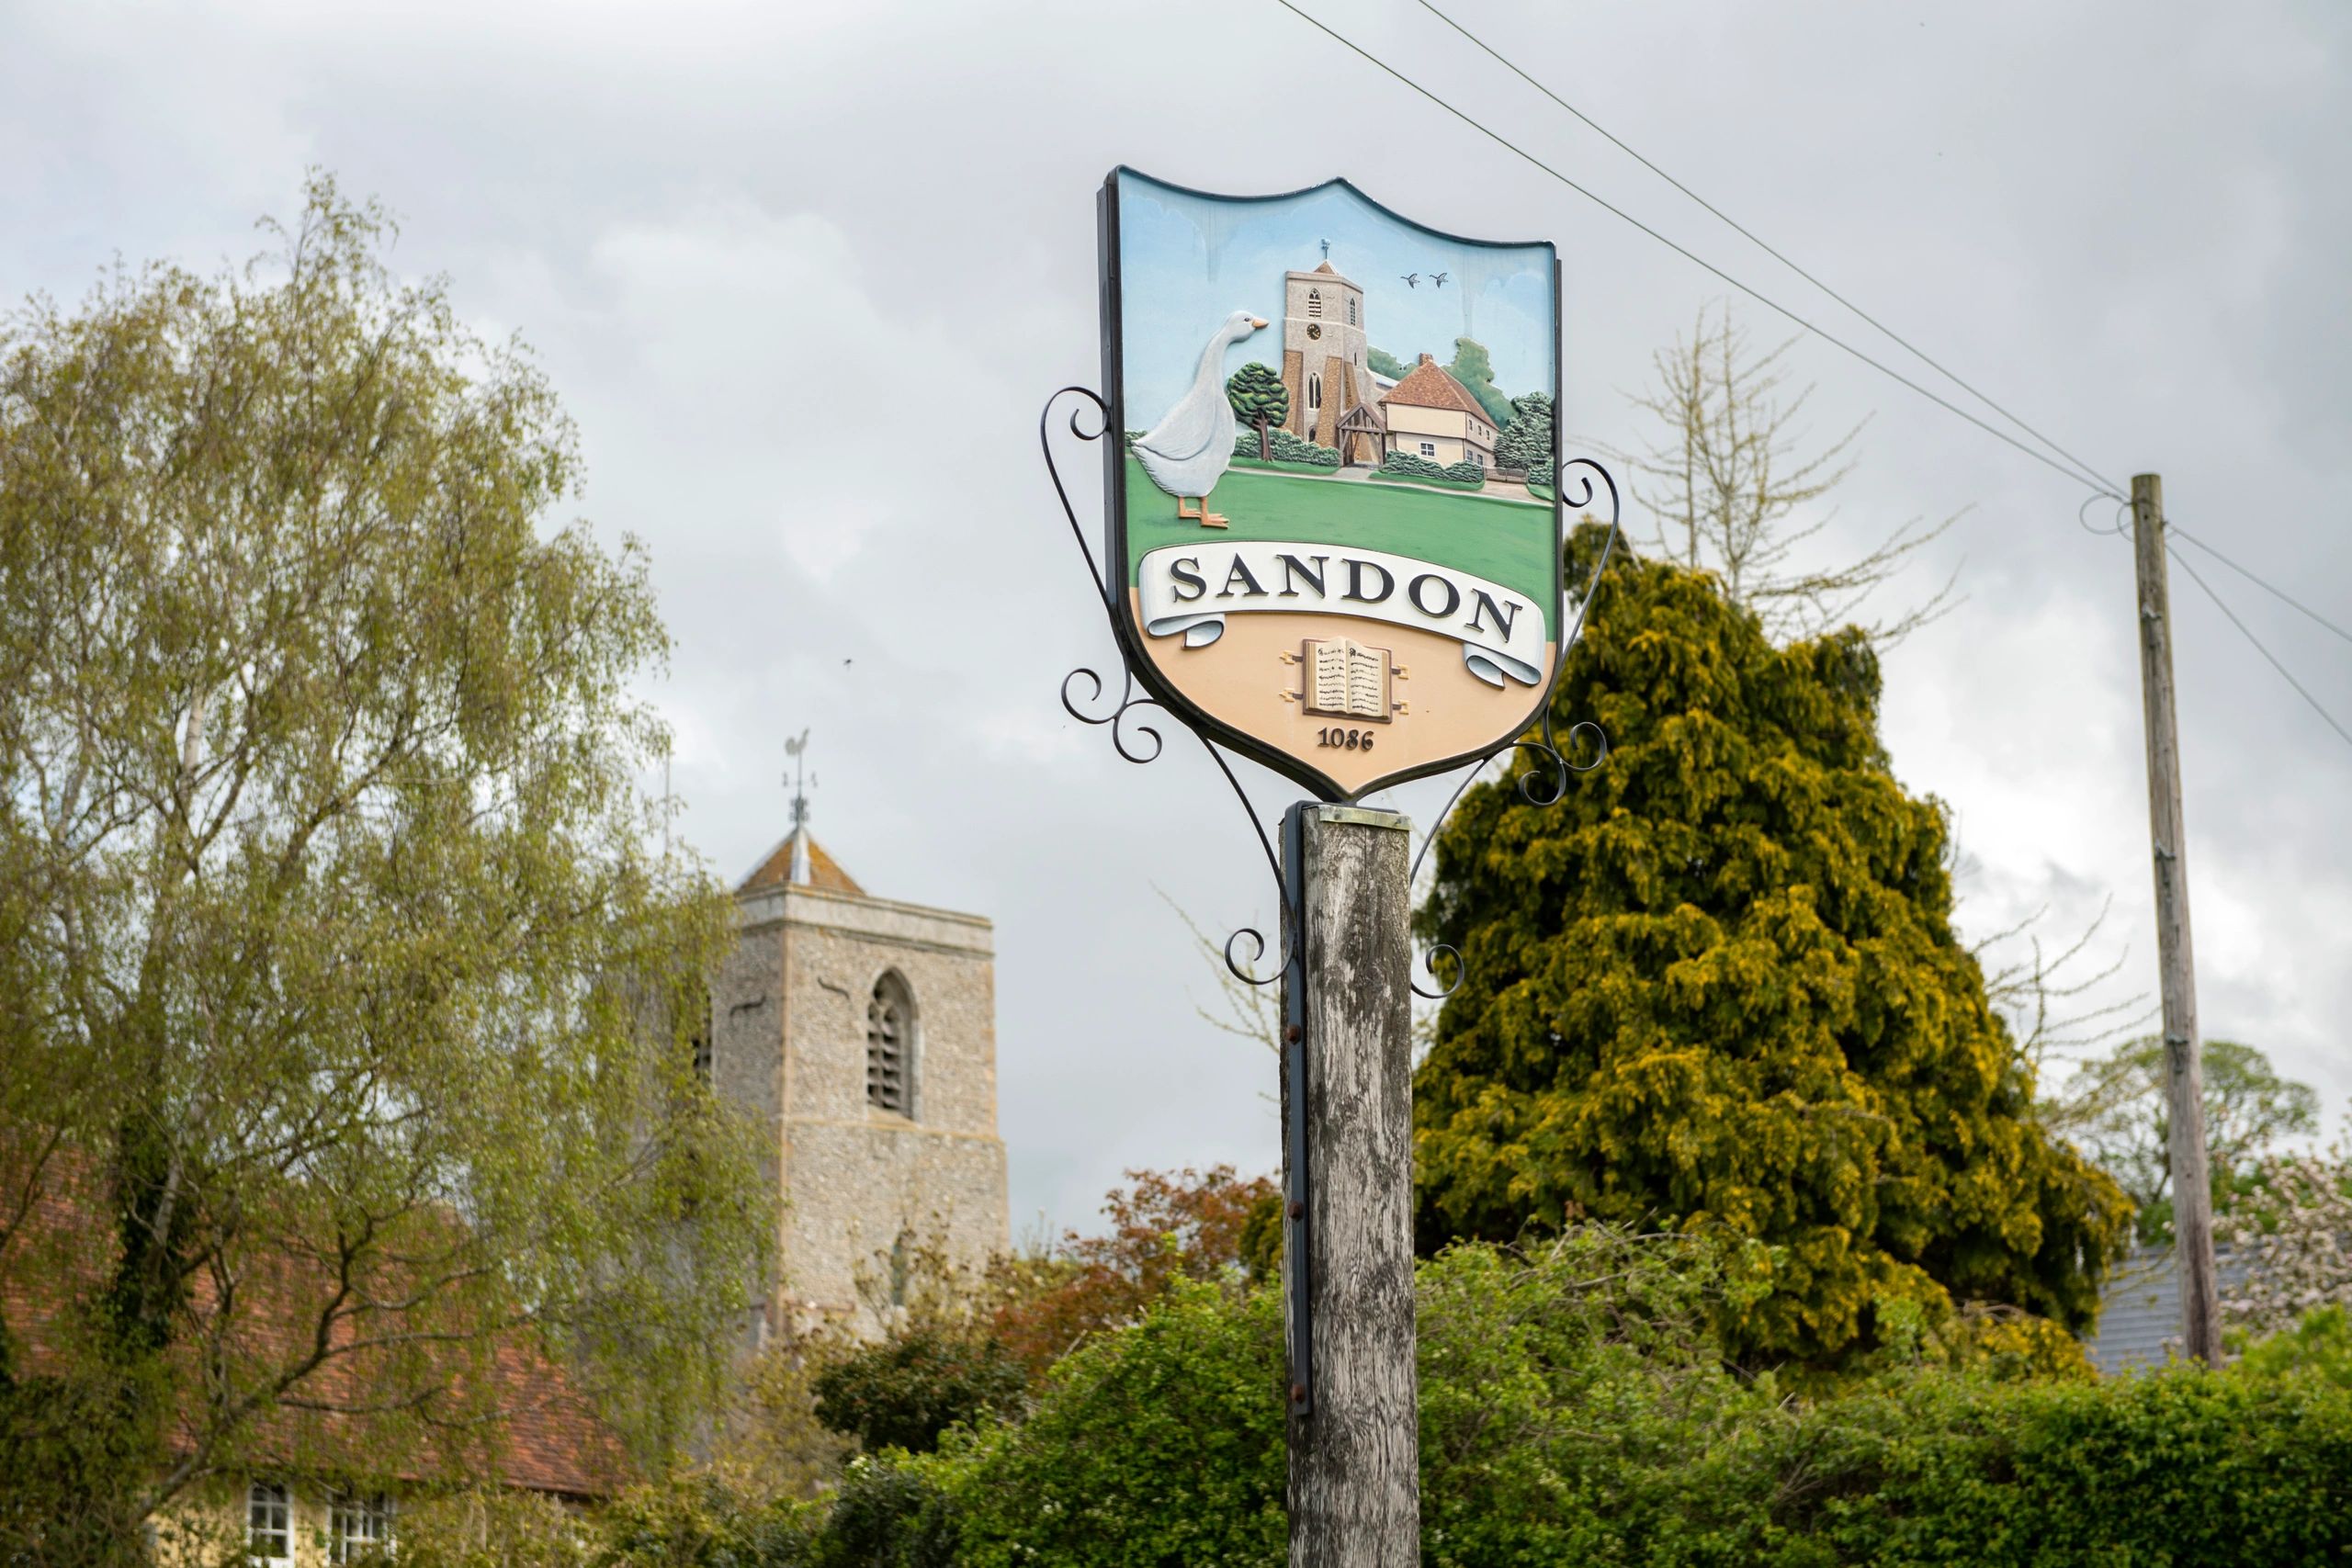 Located in the beautiful village of Sandon in Hertfordshire